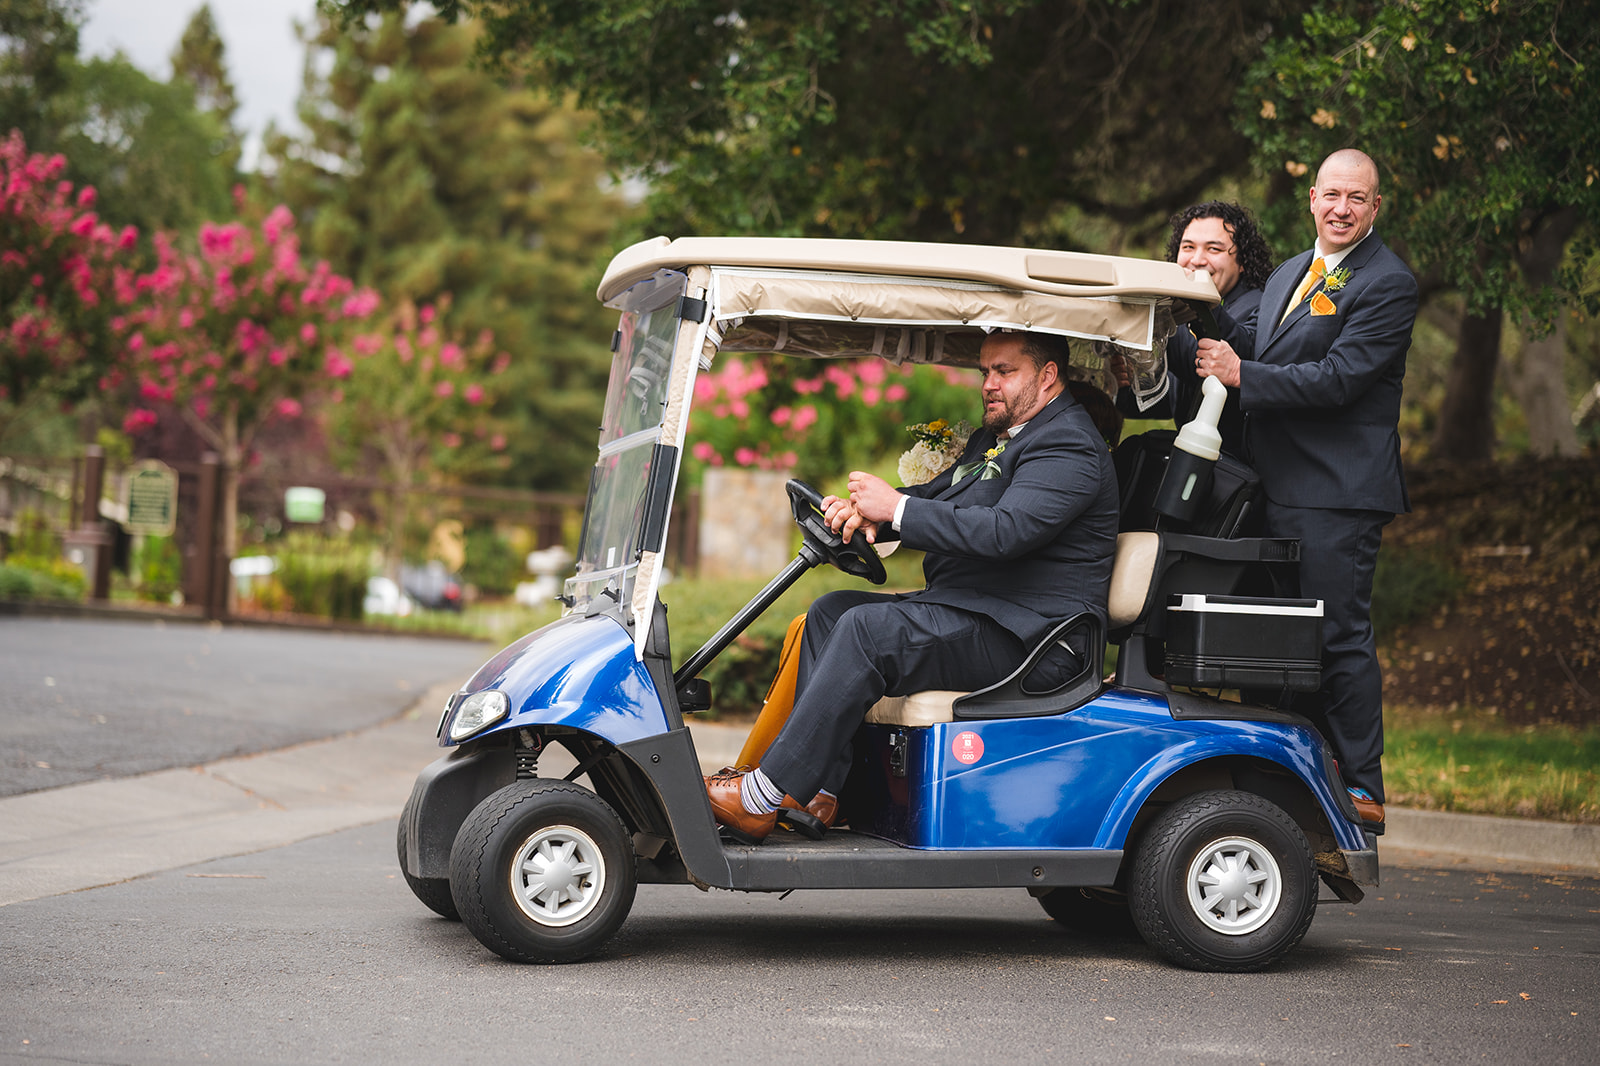 Laughter and joy as the wedding party drives golf carts around Silverado Golf Course